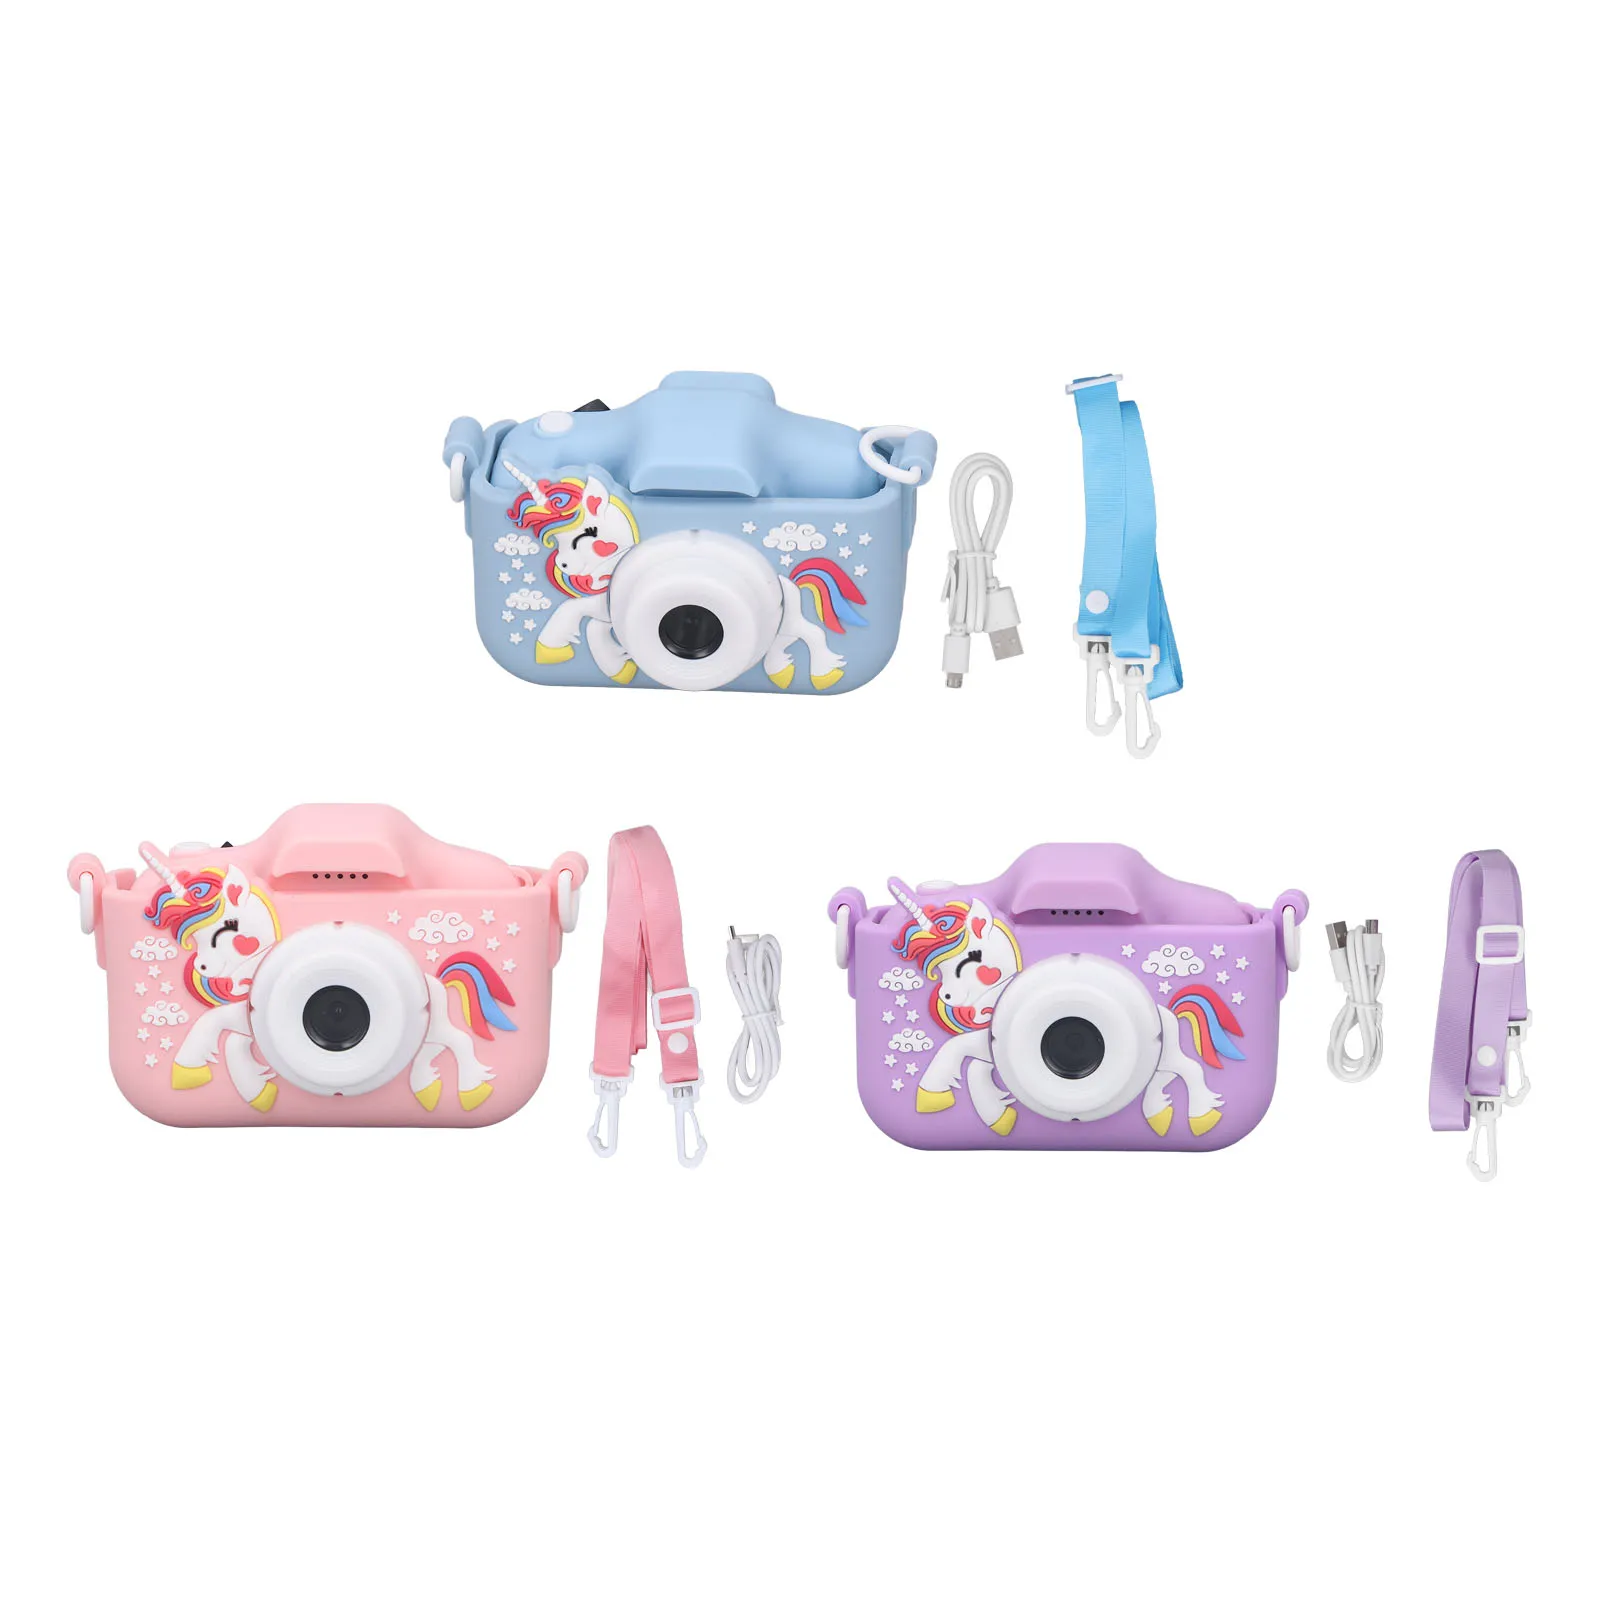 Kids Camera Toys Digital Photo Video Recording Camcorder Cute Cartoon Patterned - £22.79 GBP